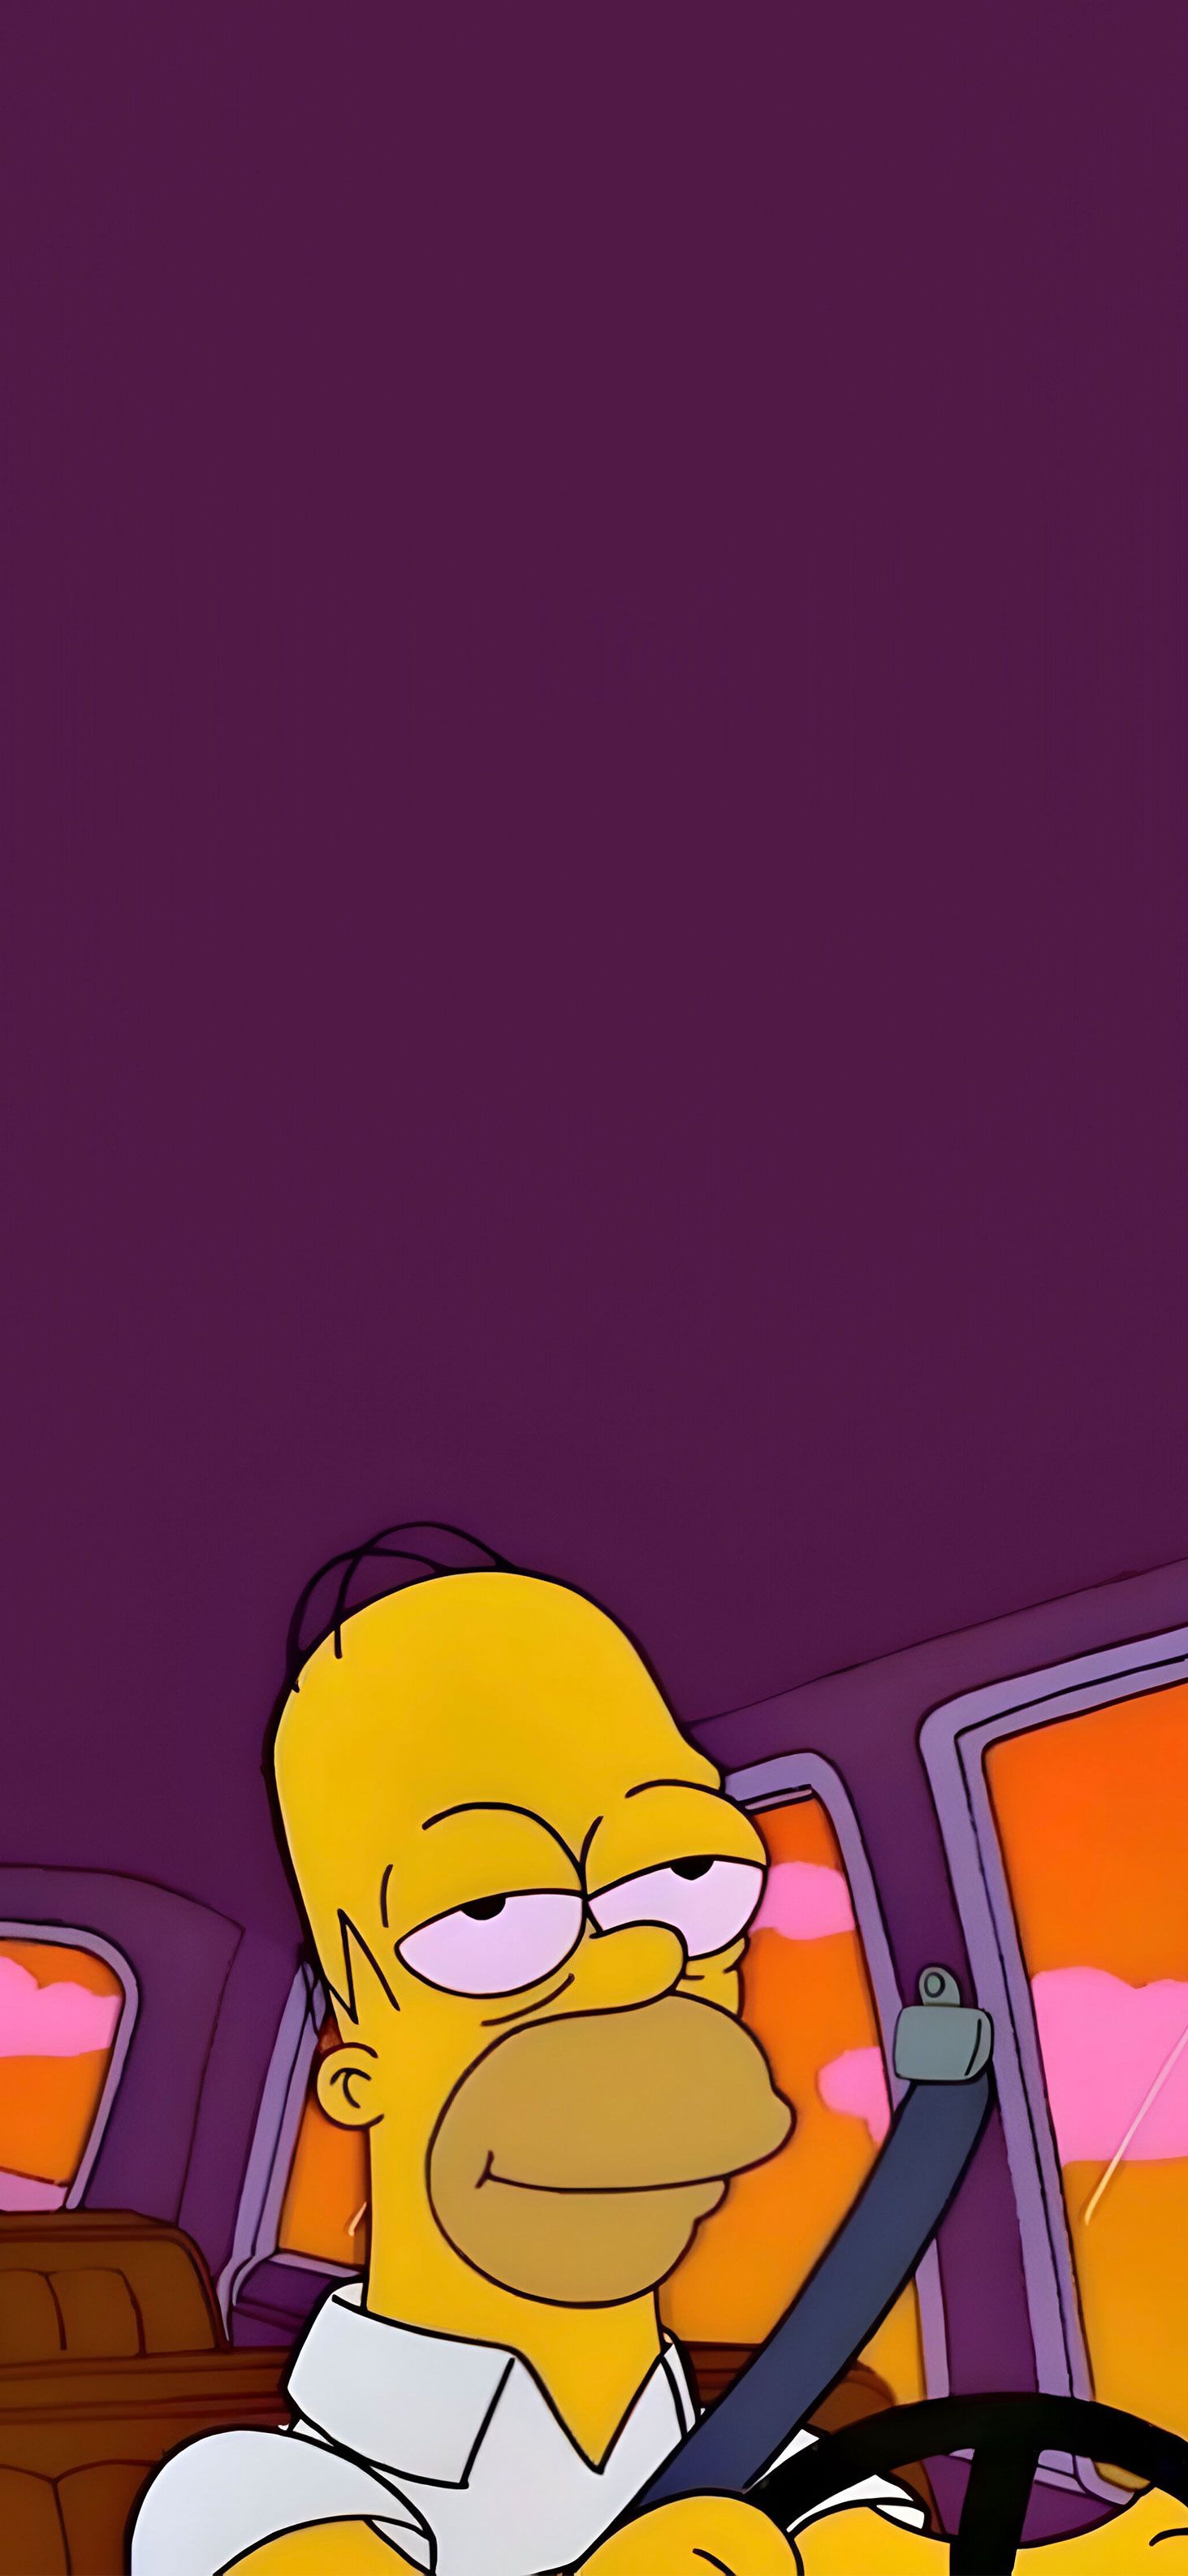 Homer Simpson driving a car with a purple background - Homer Simpson